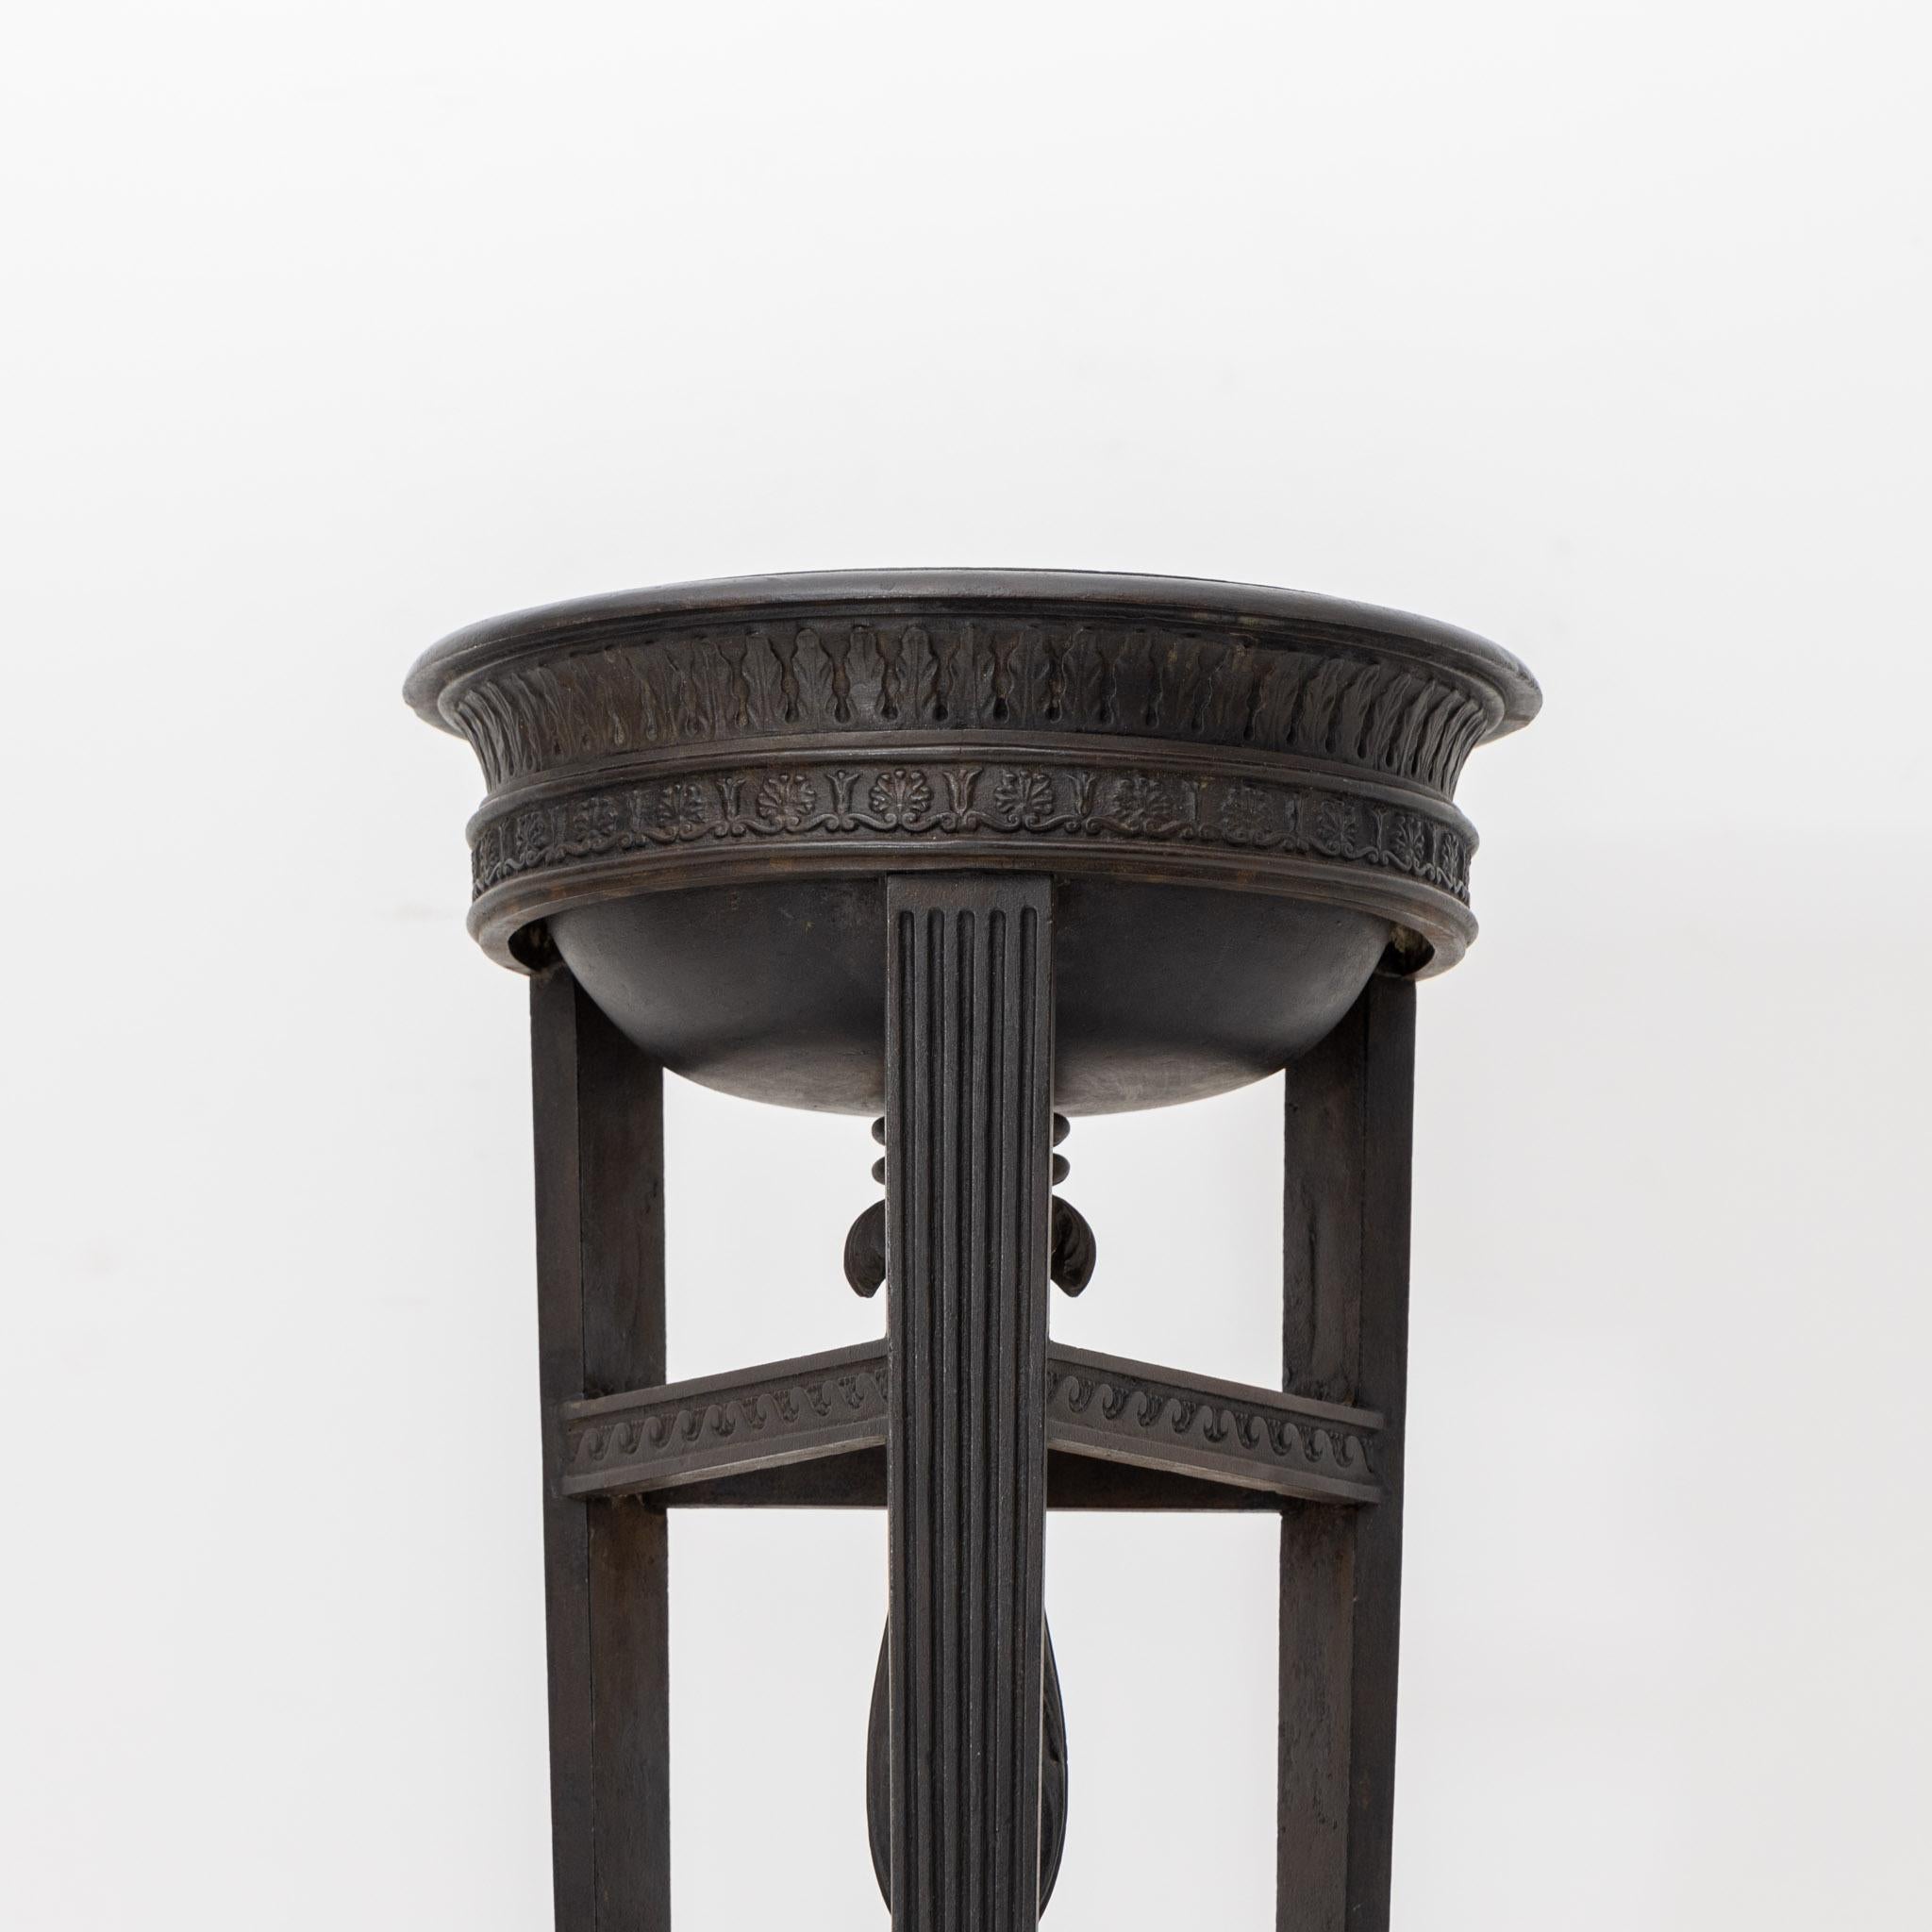 Exquisite cast iron piece attributed to the Royal Iron Foundry in Berlin or Gleiwitz, with a design likely influenced by K.F. Schinkel (1781-1841). This remarkable creation features a round bowl supported by three fluted pilasters arranged around a